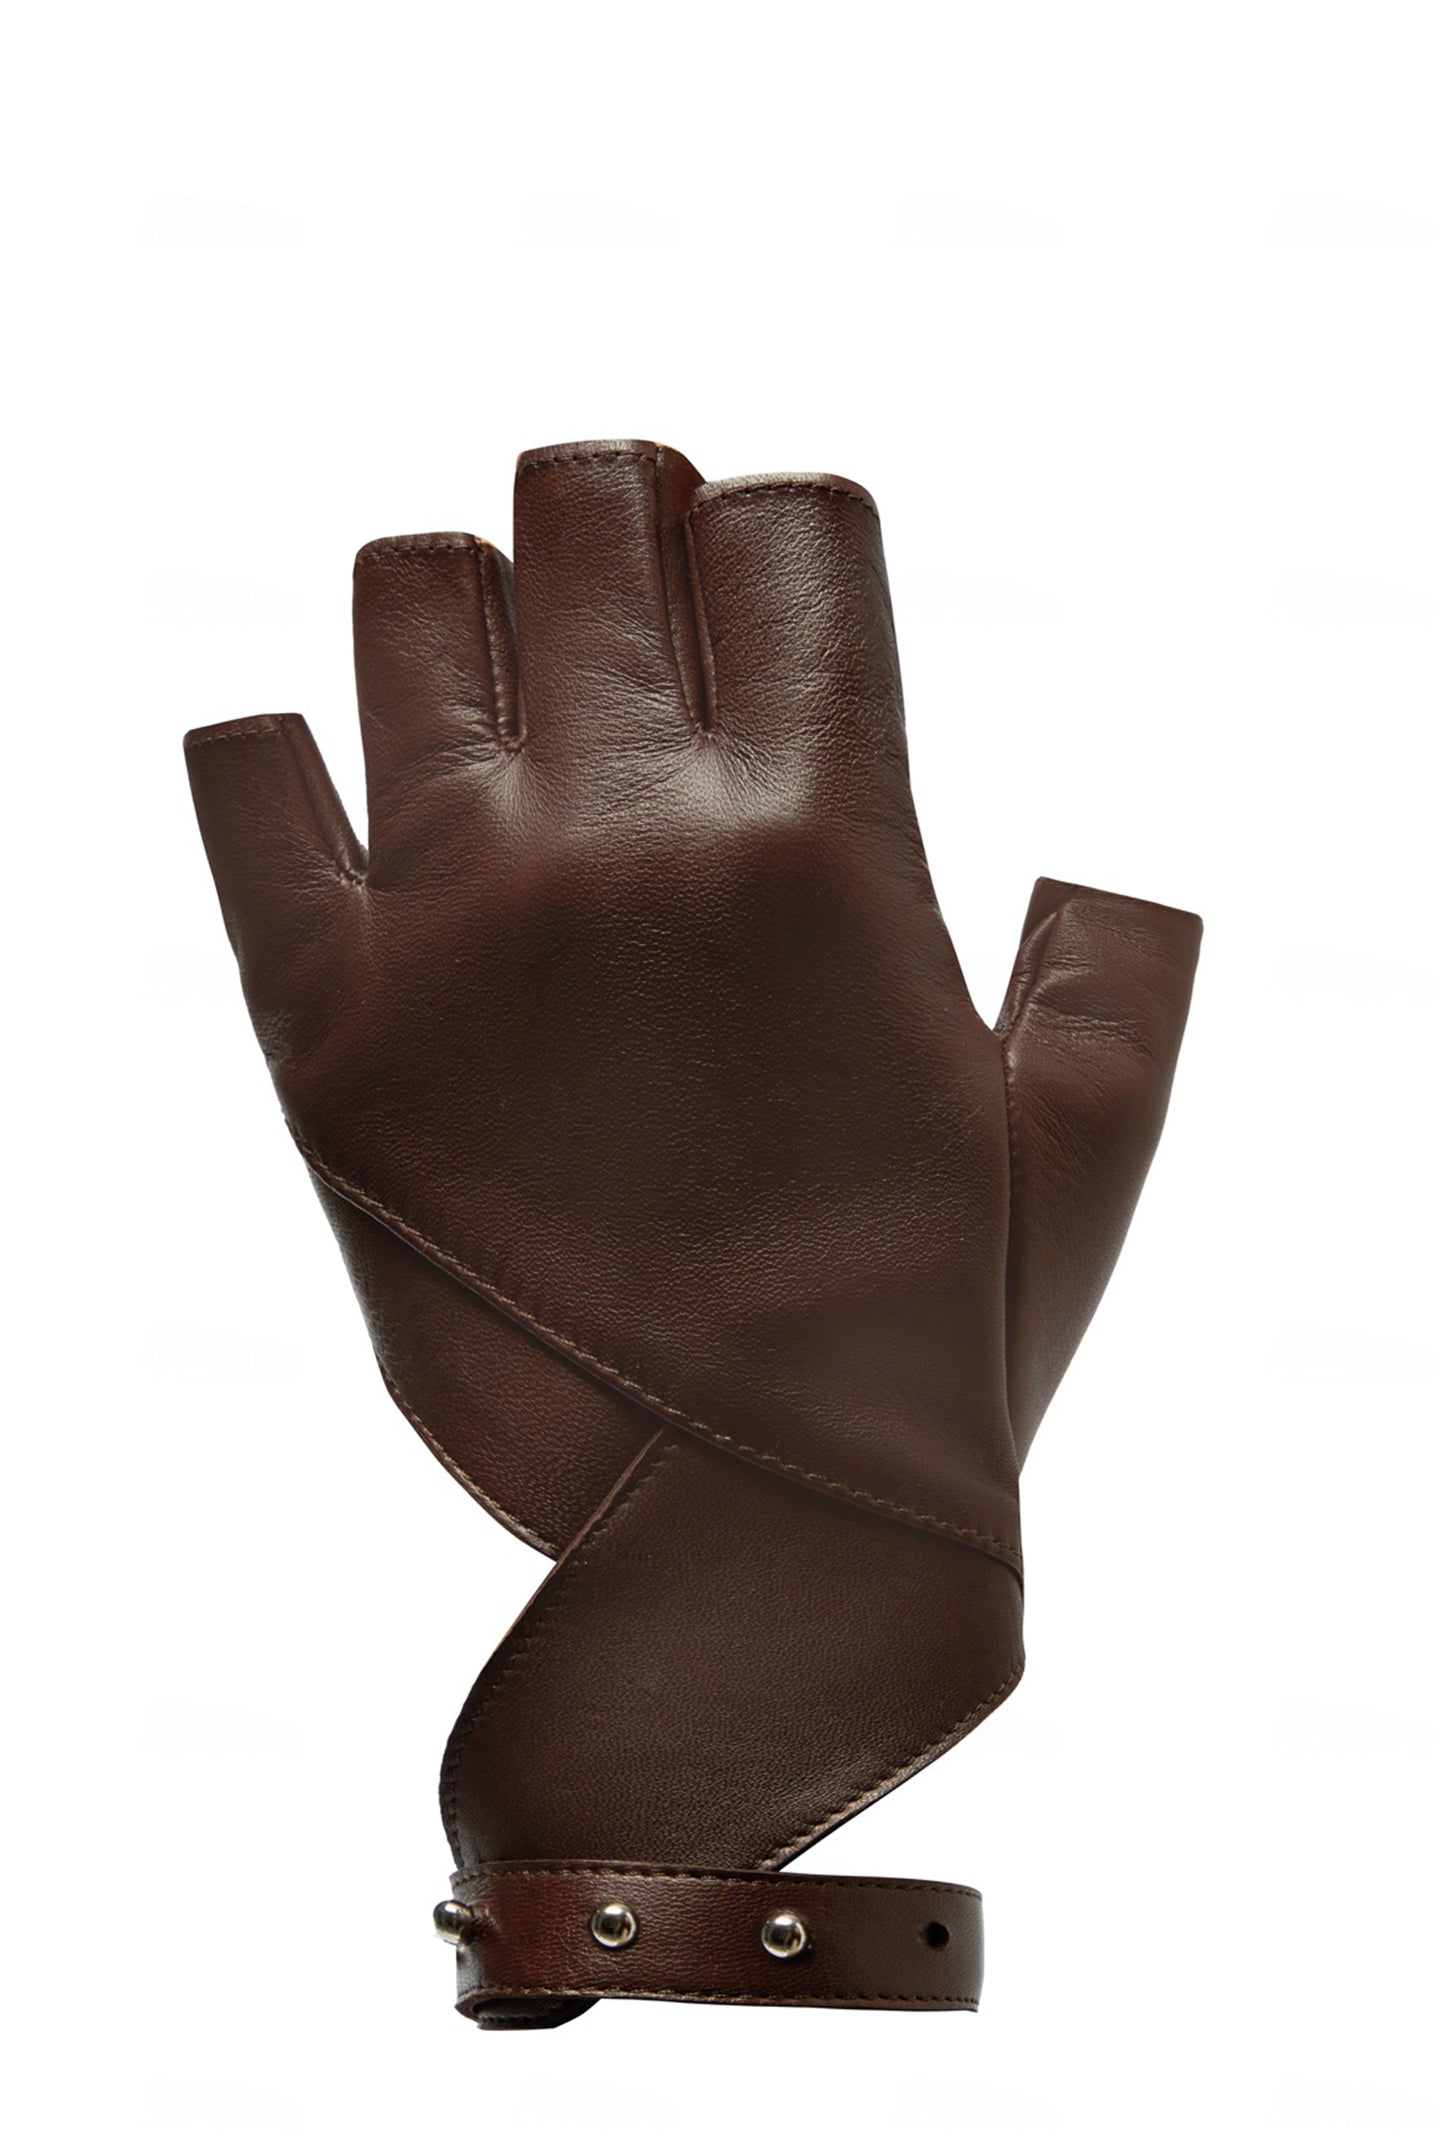 PRITCH ELEMENT Leather Fingerless Gloves in Chocolate Brown